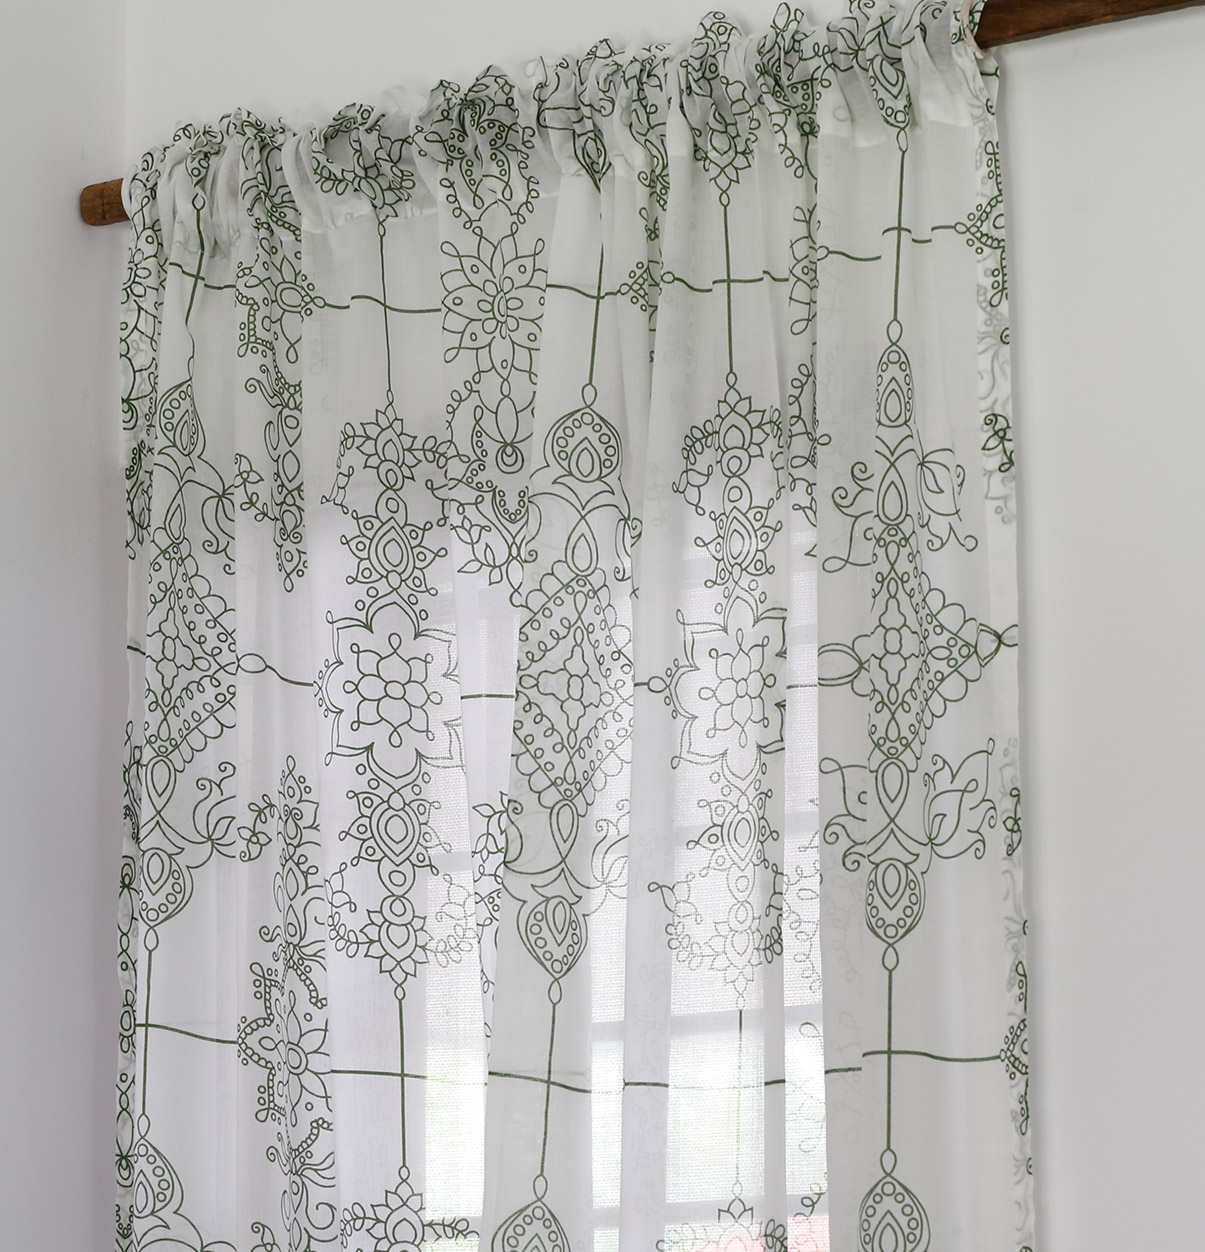 Classic Lines Sheer Cotton Curtain Mint Green